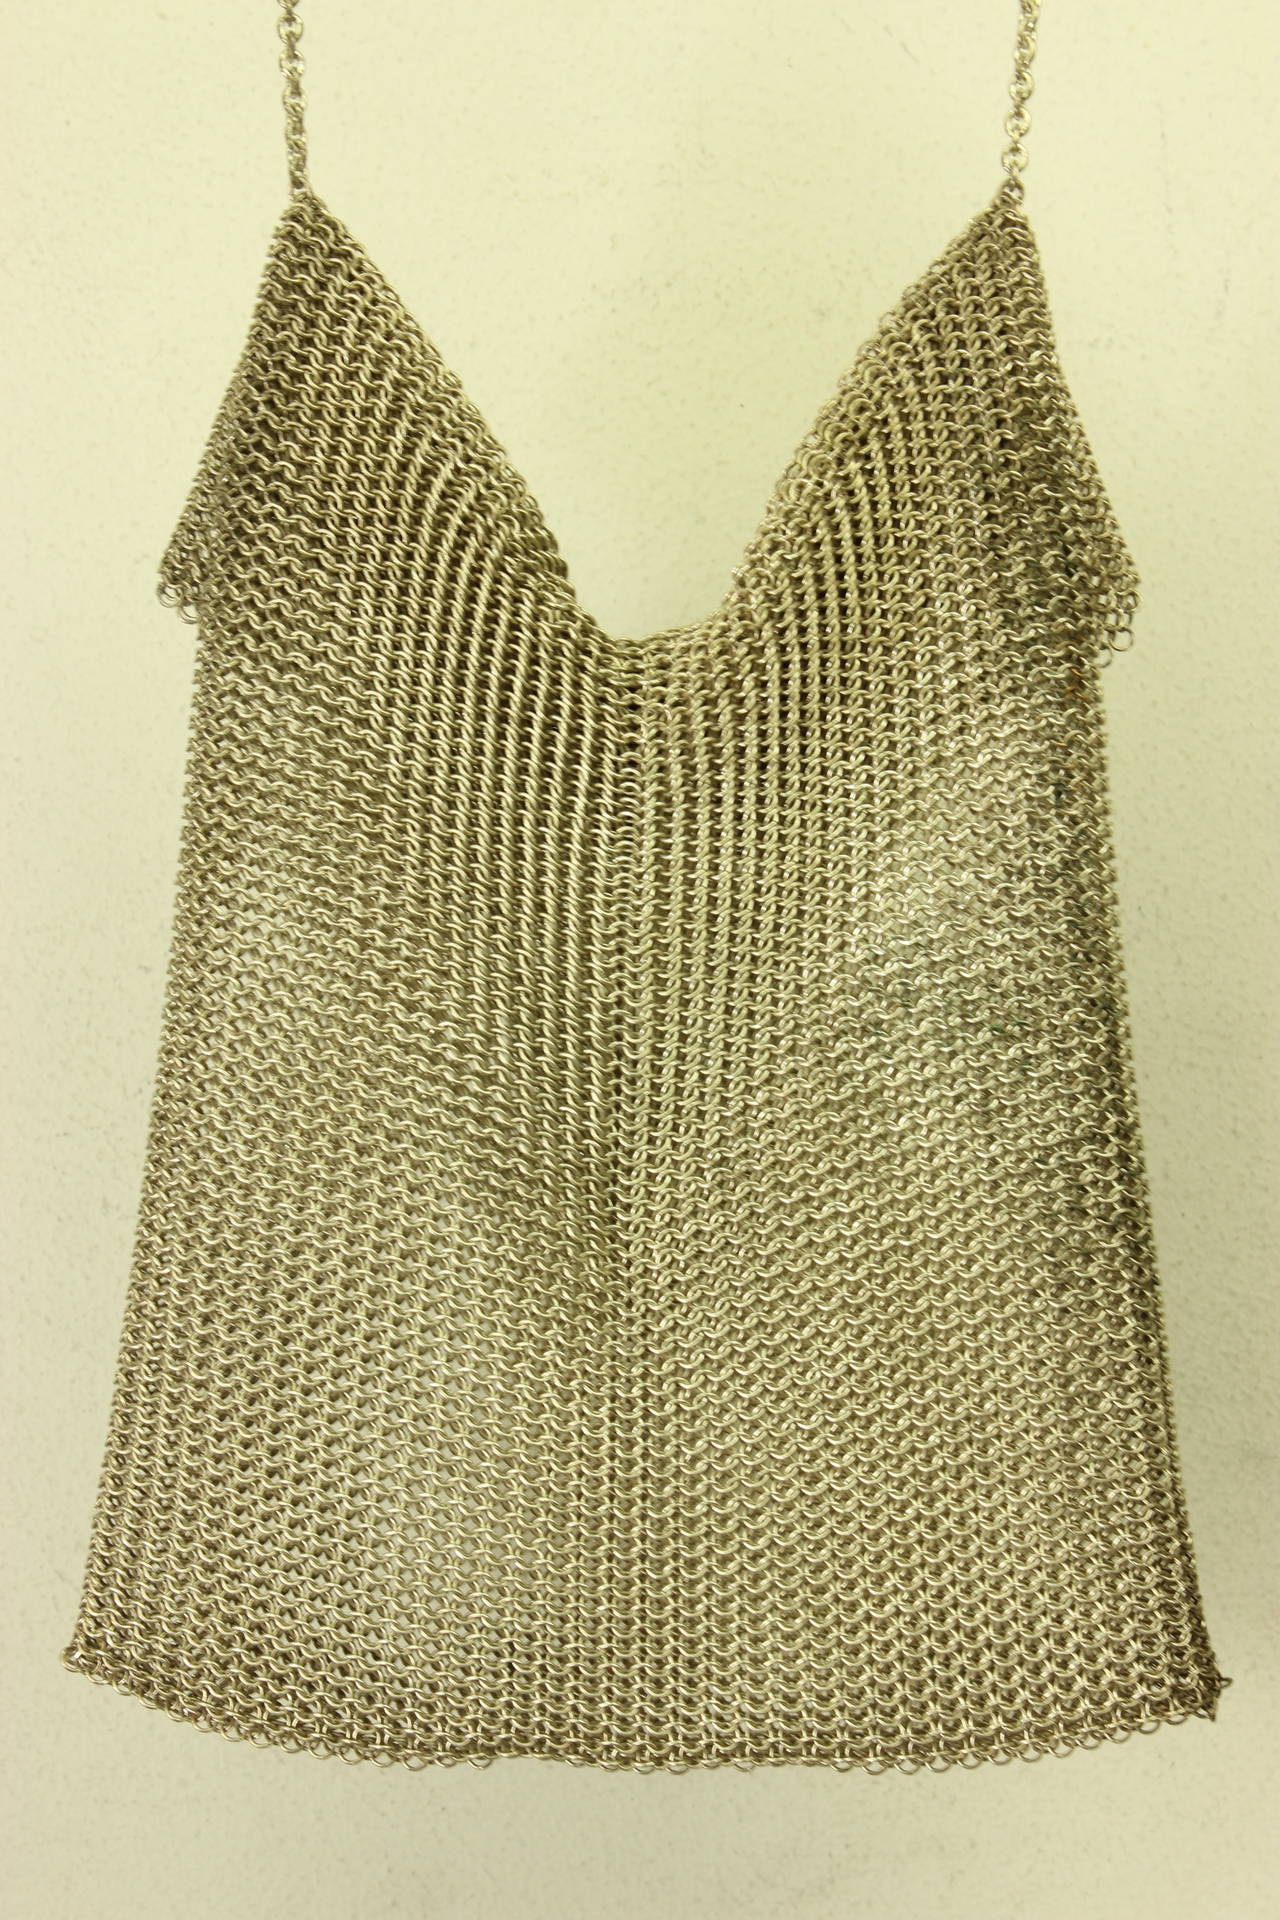 1920's Chain Mesh Bag Unique Style at 1stdibs